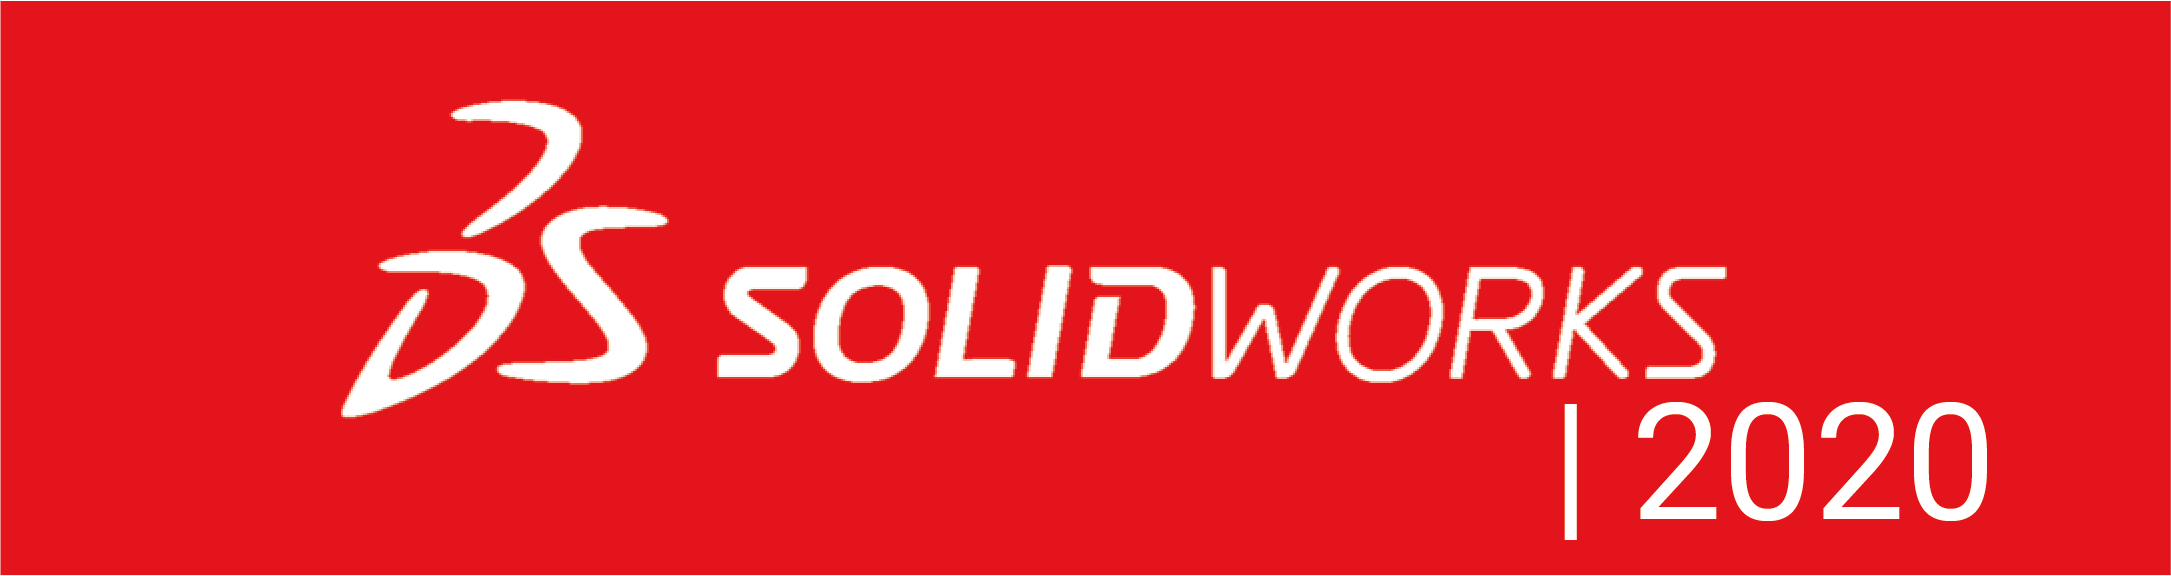 free download solidworks 2020 with crack